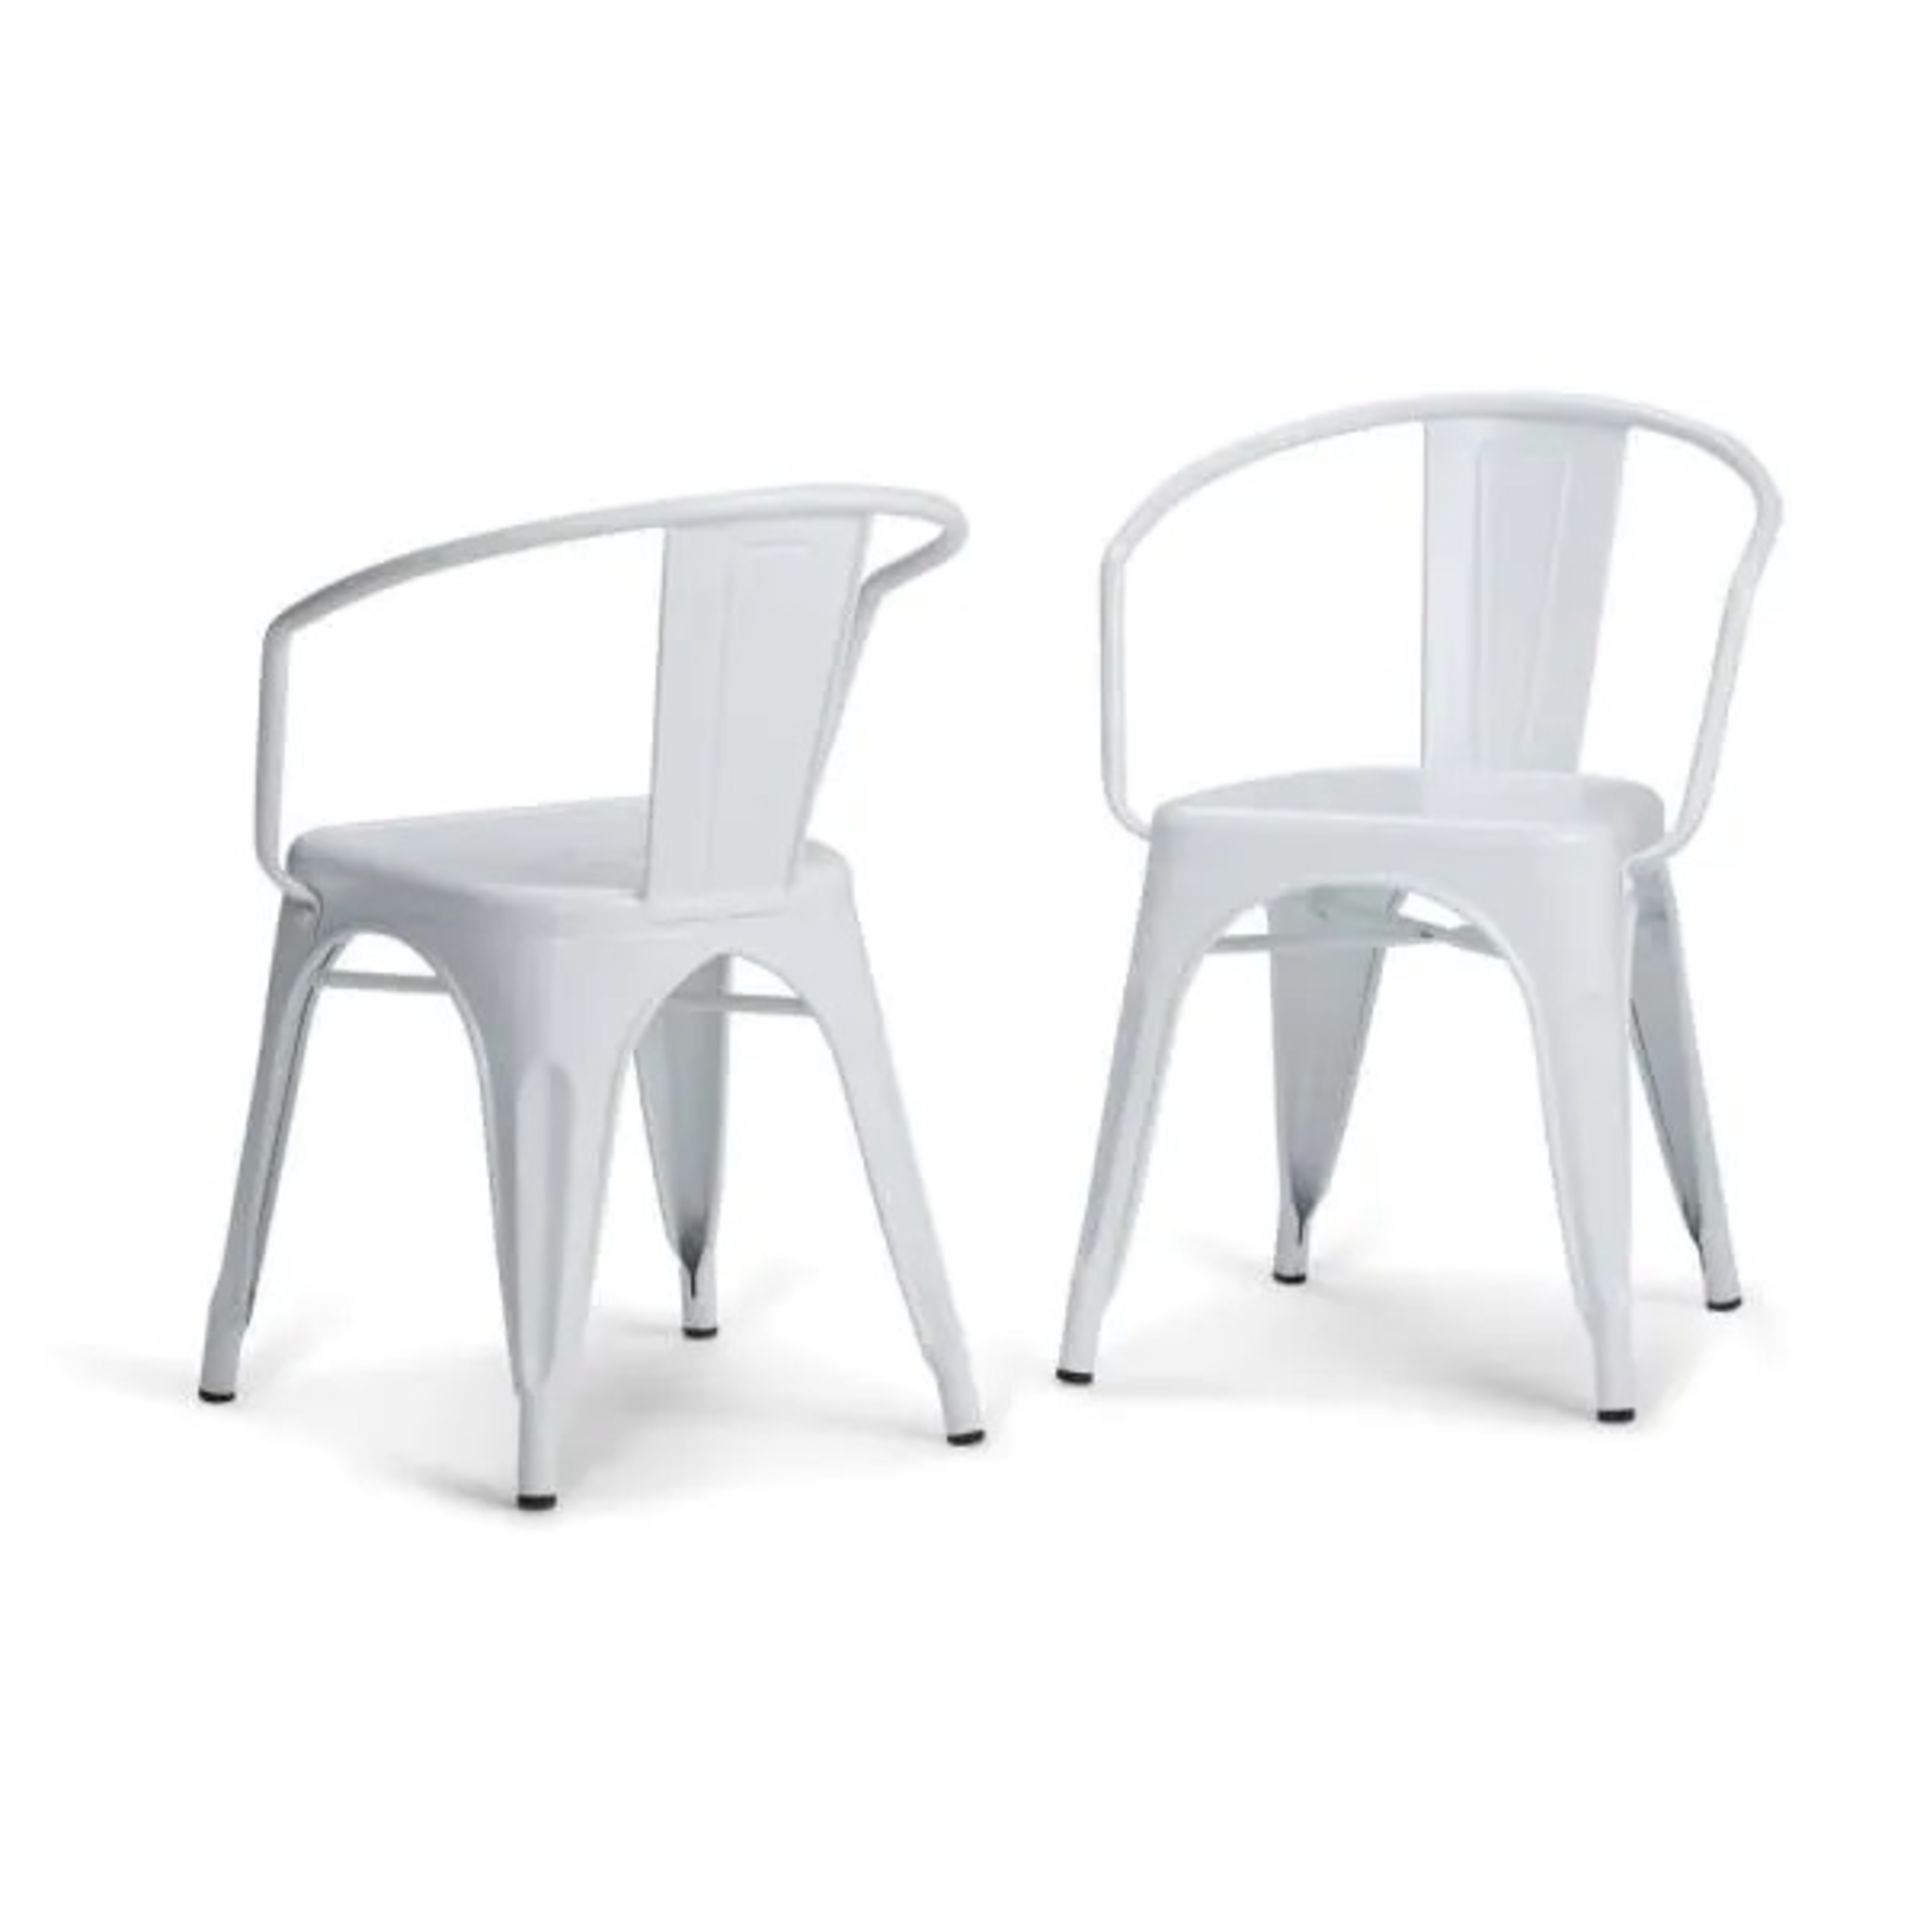 4 x Industrial Tolix Style Stackable Chairs With Armrests - Finish: WHITE - Ideal For Bistros, Pub - Image 4 of 4